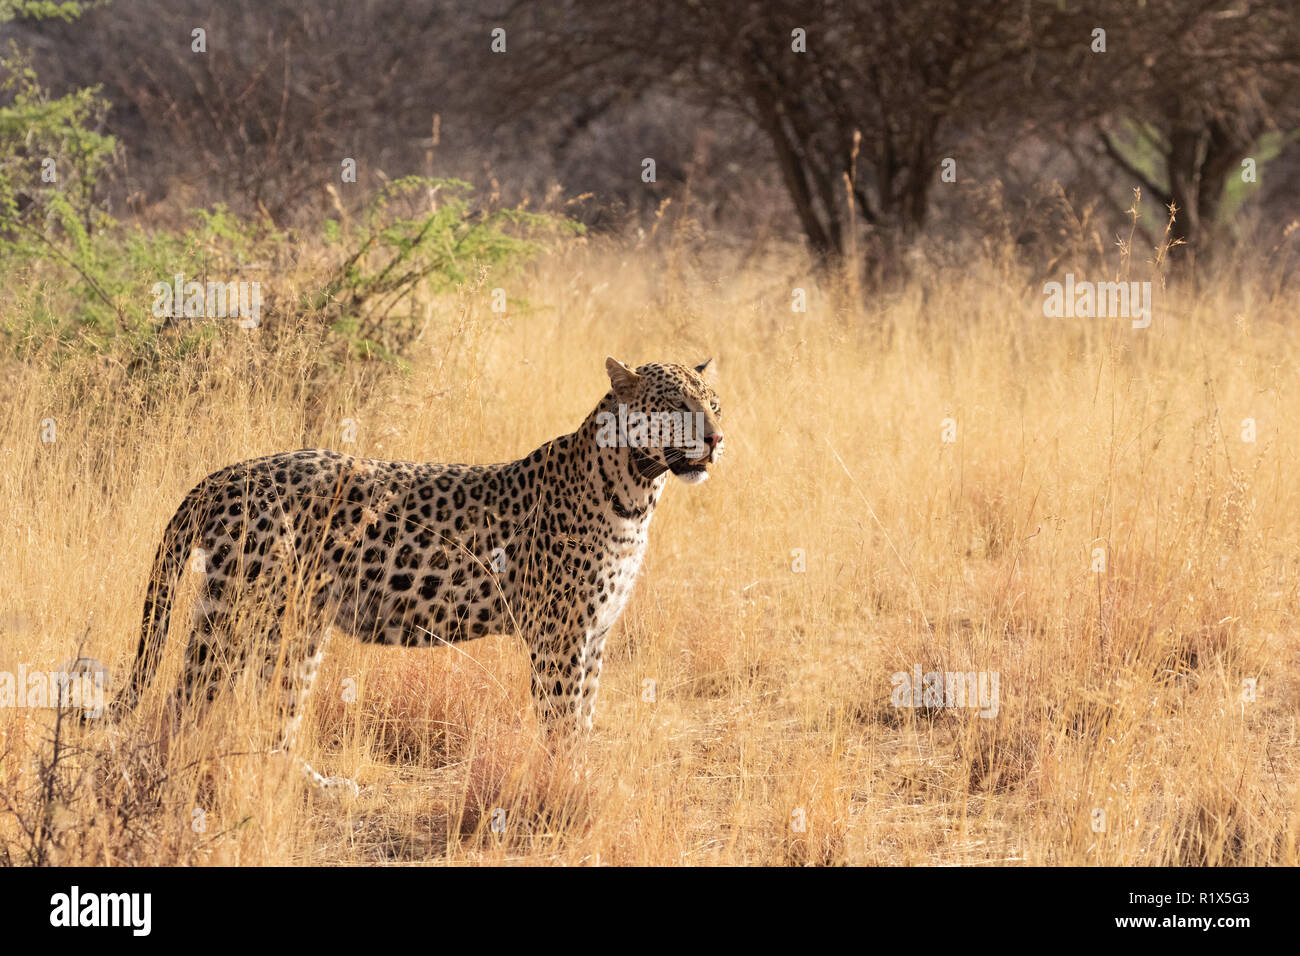 Africa leopard - one adult male leopard ( Panthera Pardus ), A collared leopard which can be tracked; Africat Foundation, Okonjima, Namibia Africa Stock Photo